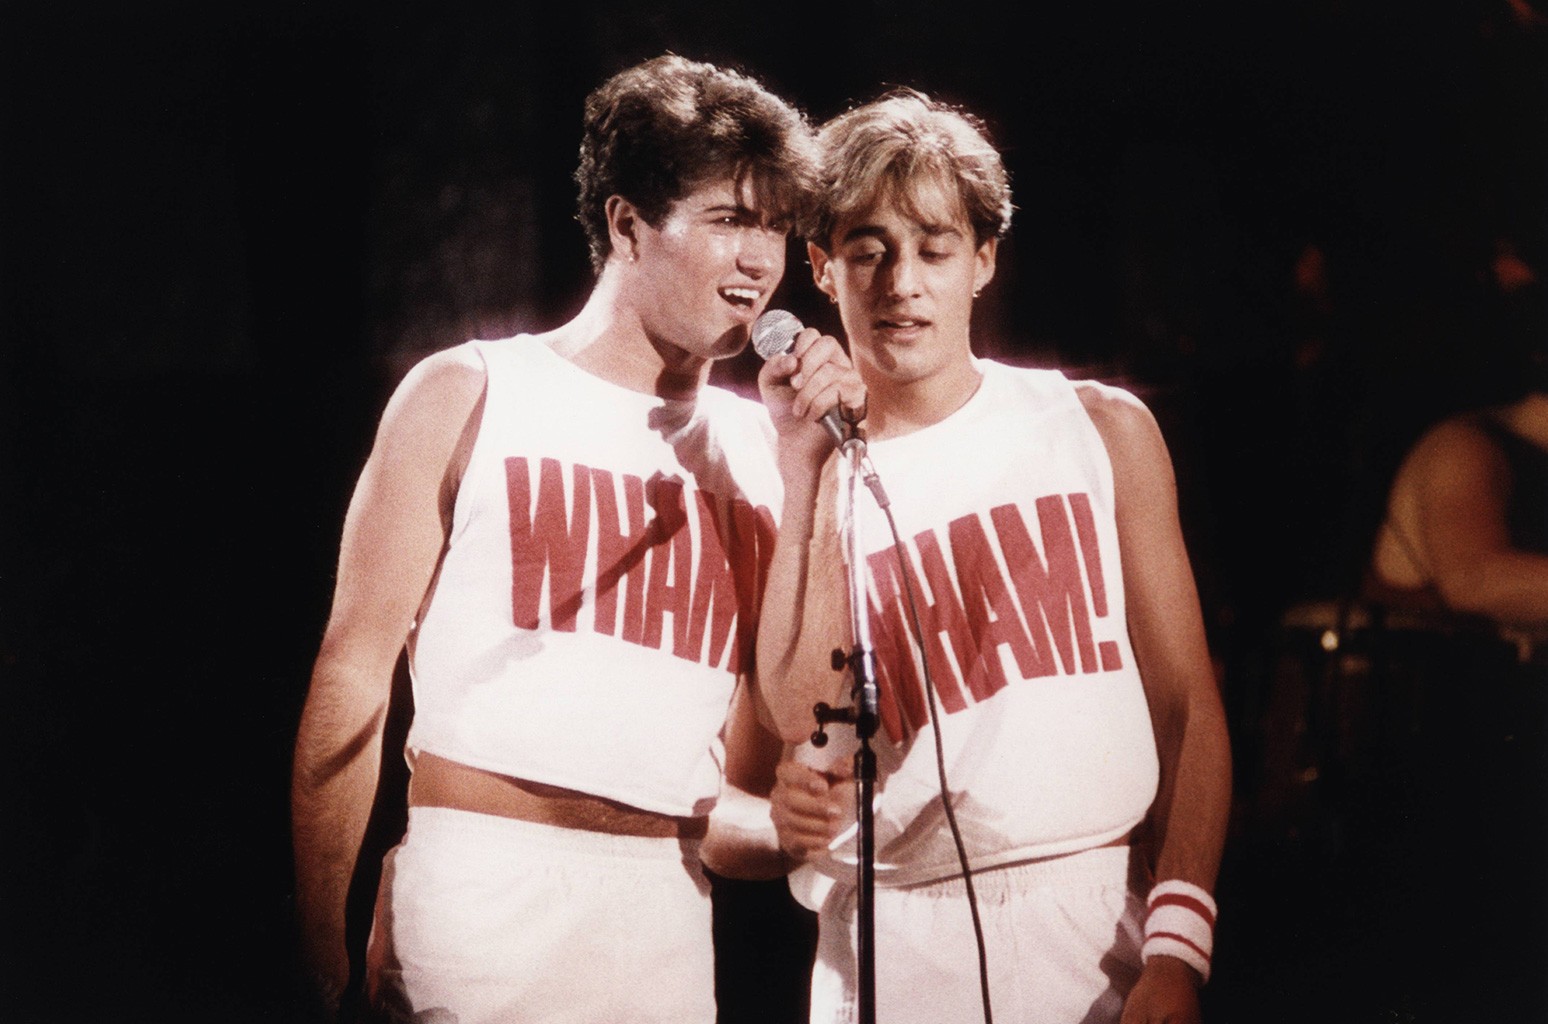 Wham’s “Last Christmas” completes his 36-year journey to the top of the UK chart